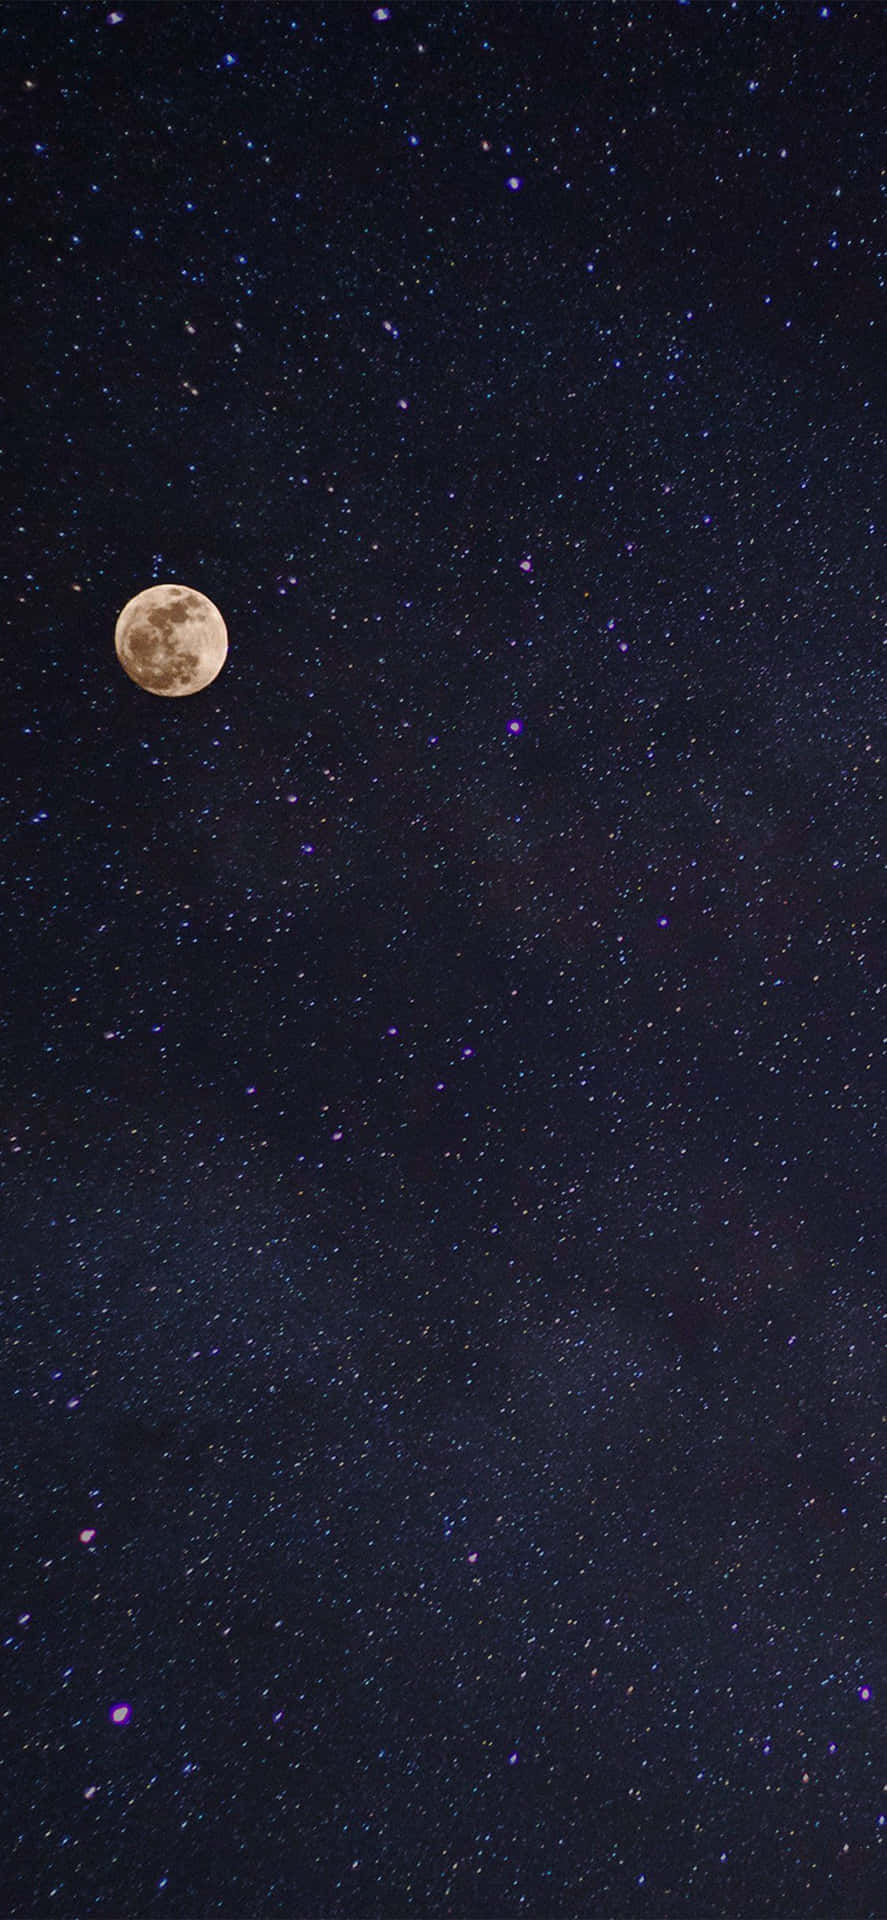 Majestic moon and stars light up the night sky Wallpaper